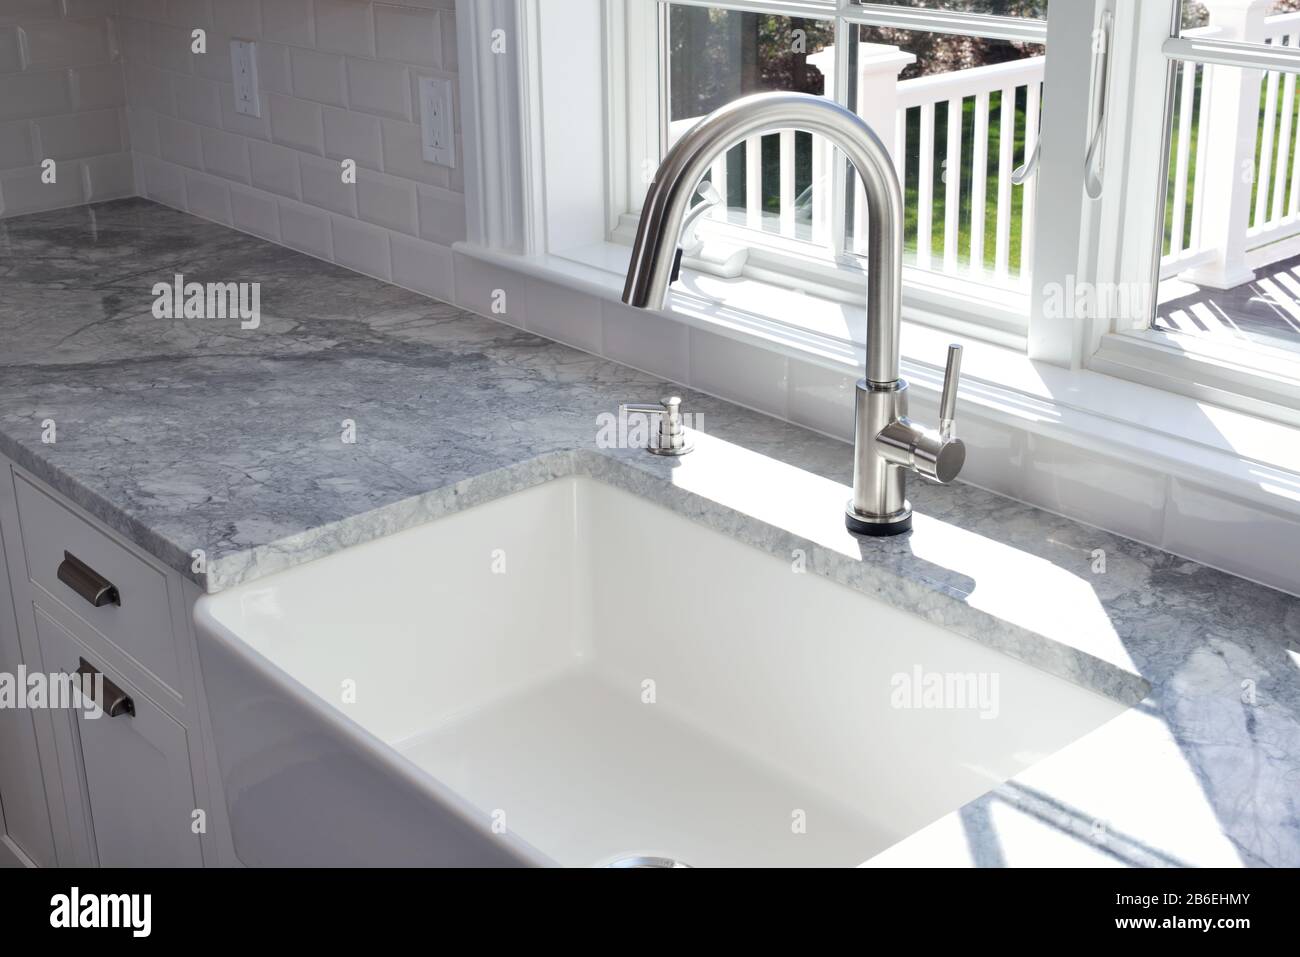 Modern kitchen sink and single handle brass faucet with soap dispenser, marble countertop and window to the garden. Stock Photo